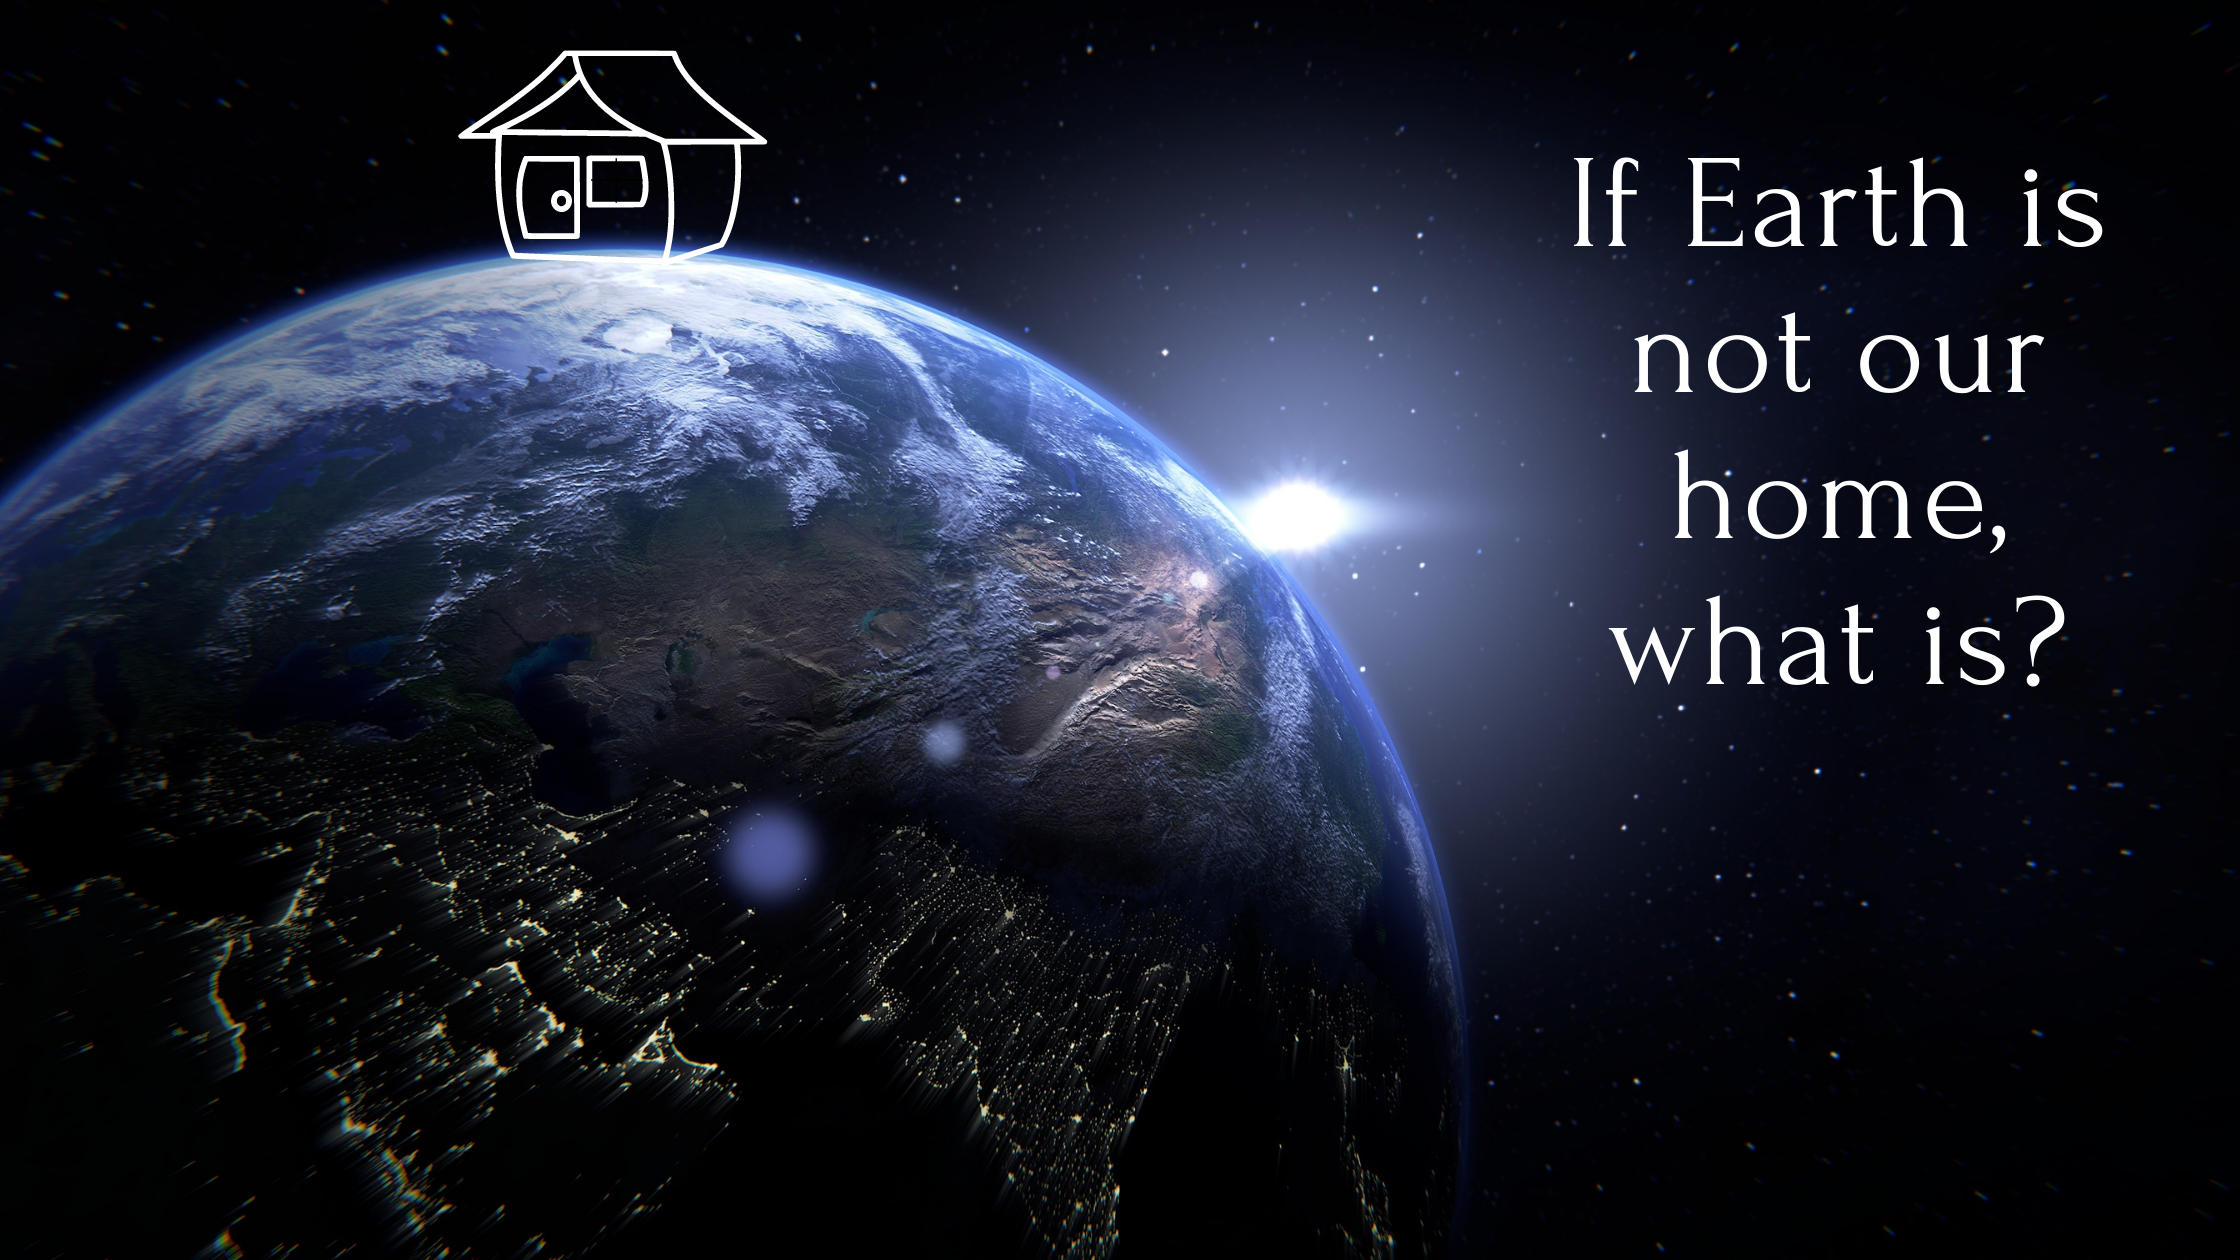 If Earth is not our home, what is?